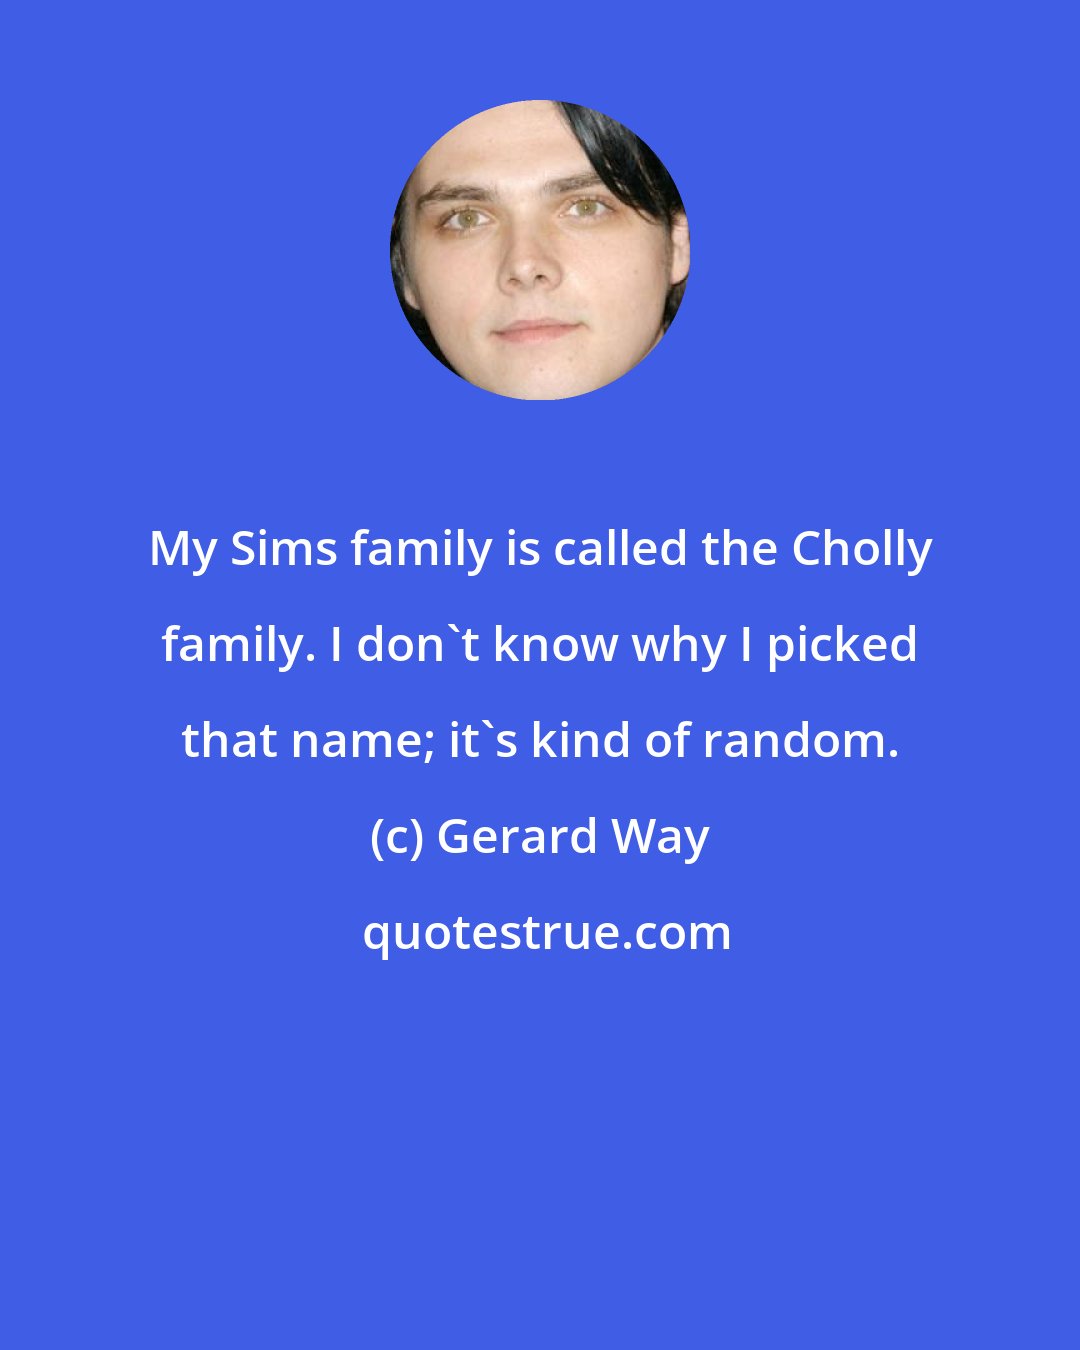 Gerard Way: My Sims family is called the Cholly family. I don't know why I picked that name; it's kind of random.